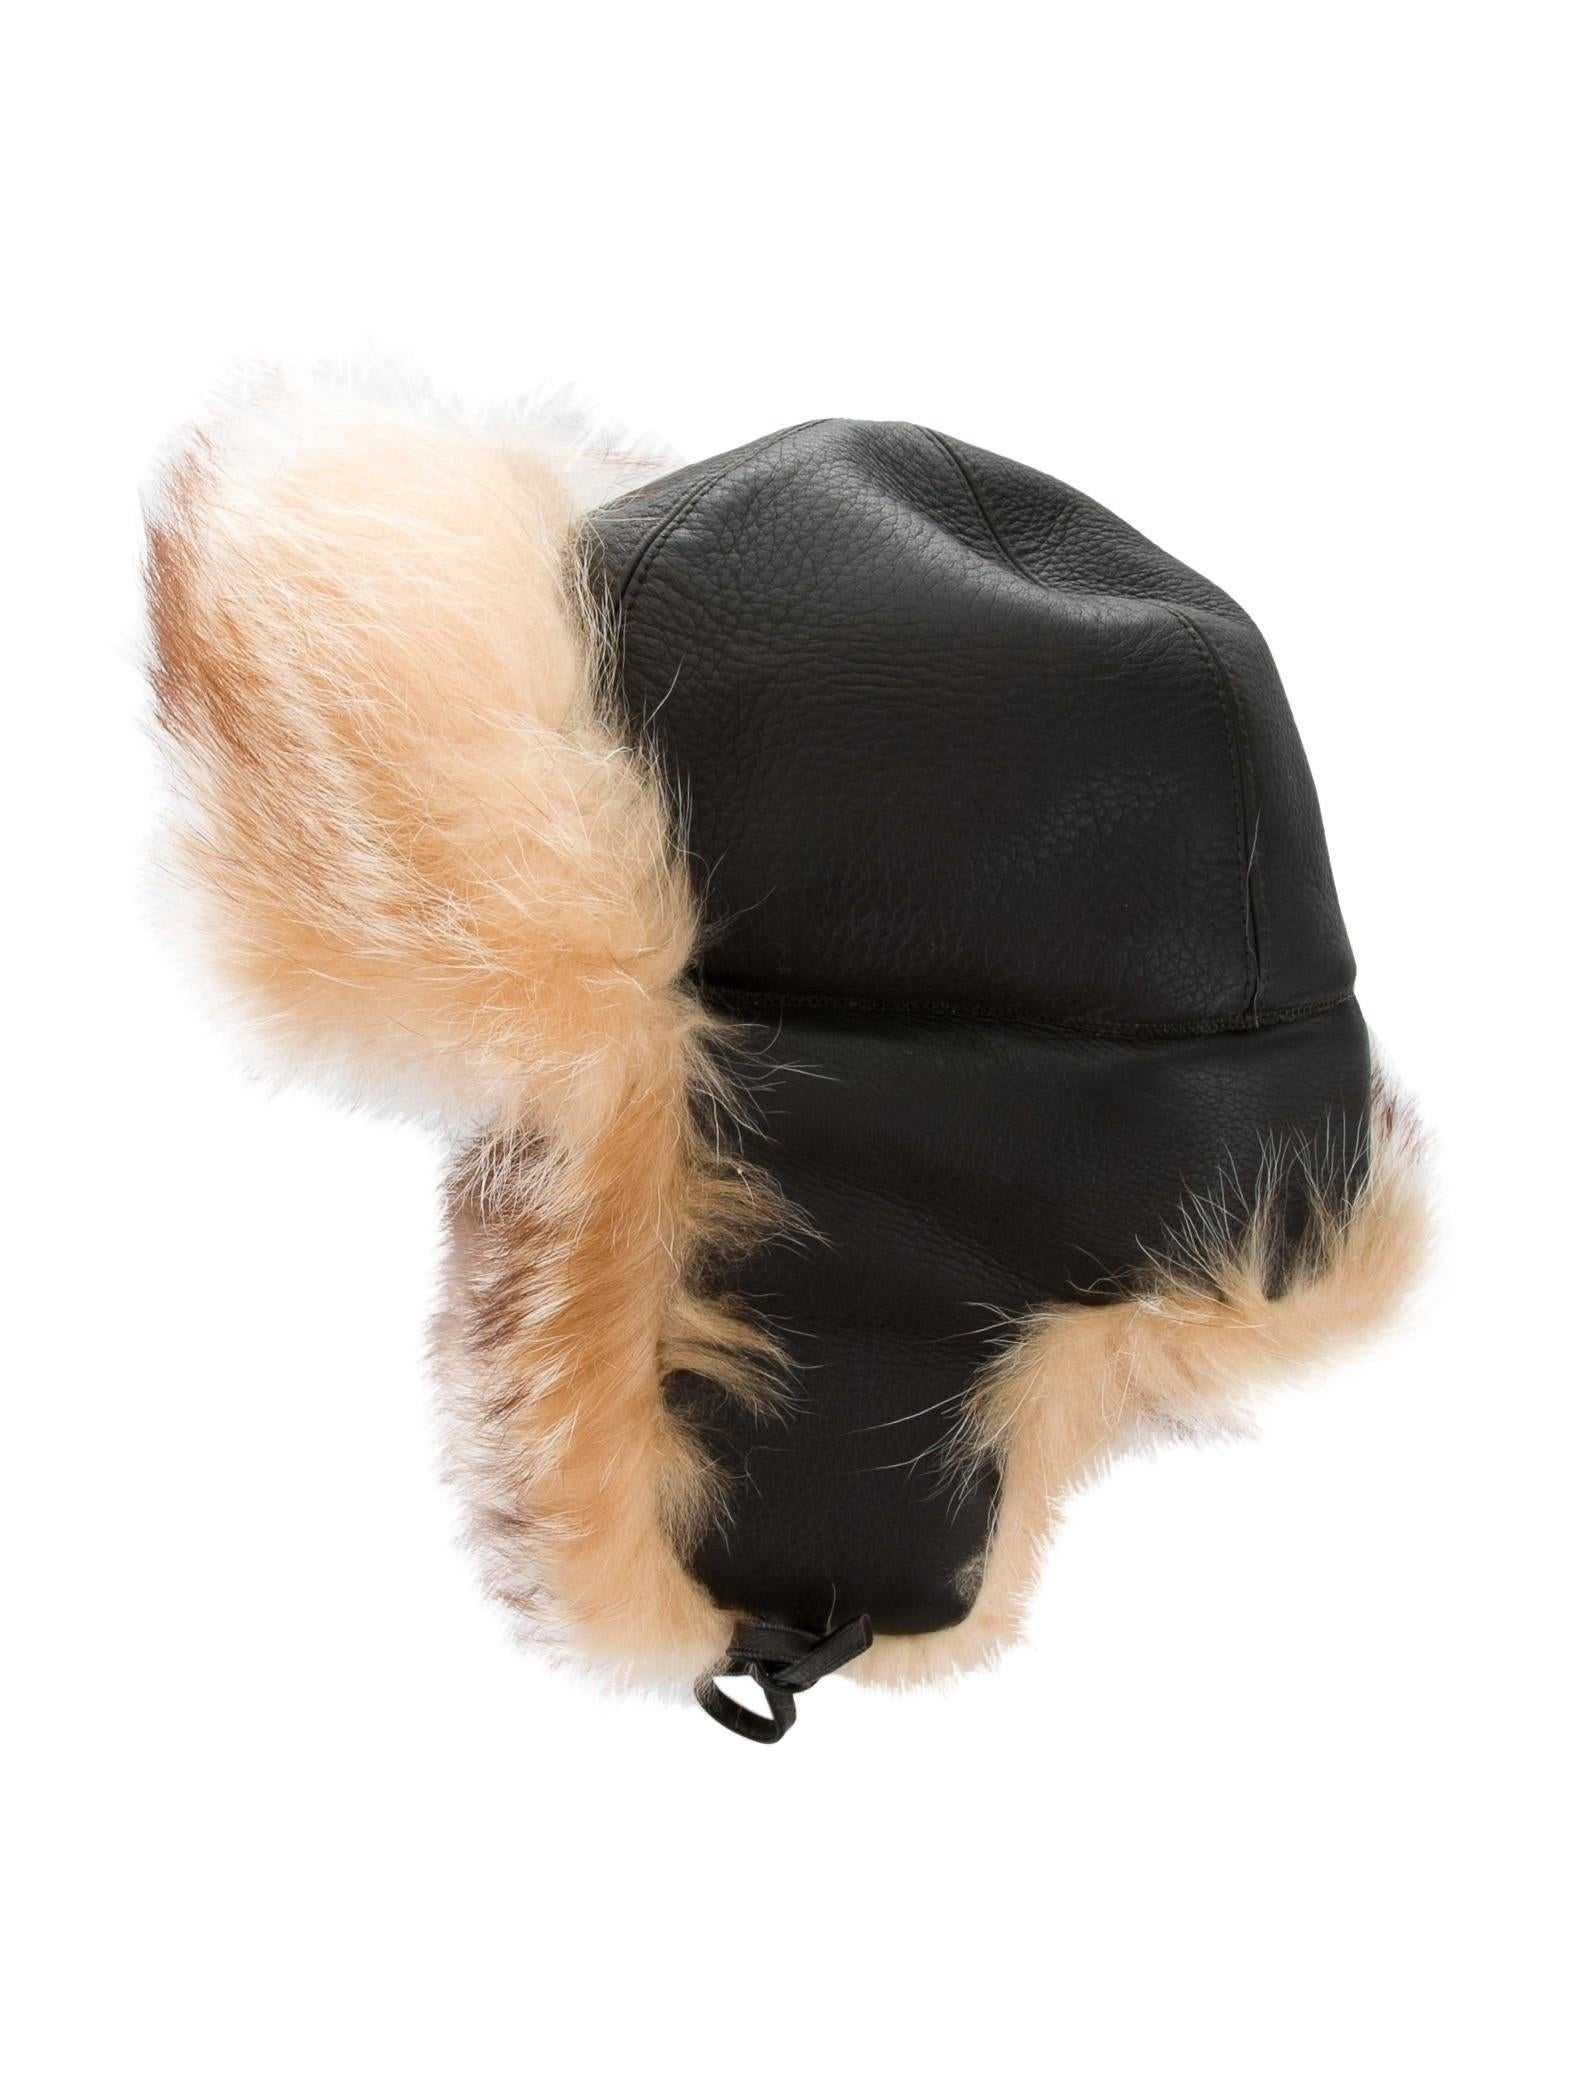 Hermes New Leather Cognac Fur Russian Style Men's Women's Winter Flap Hat in Box

Leather
Raccoon fur 
Woven lining 
Tie straps at side flaps
Made in France
Brim measures 3